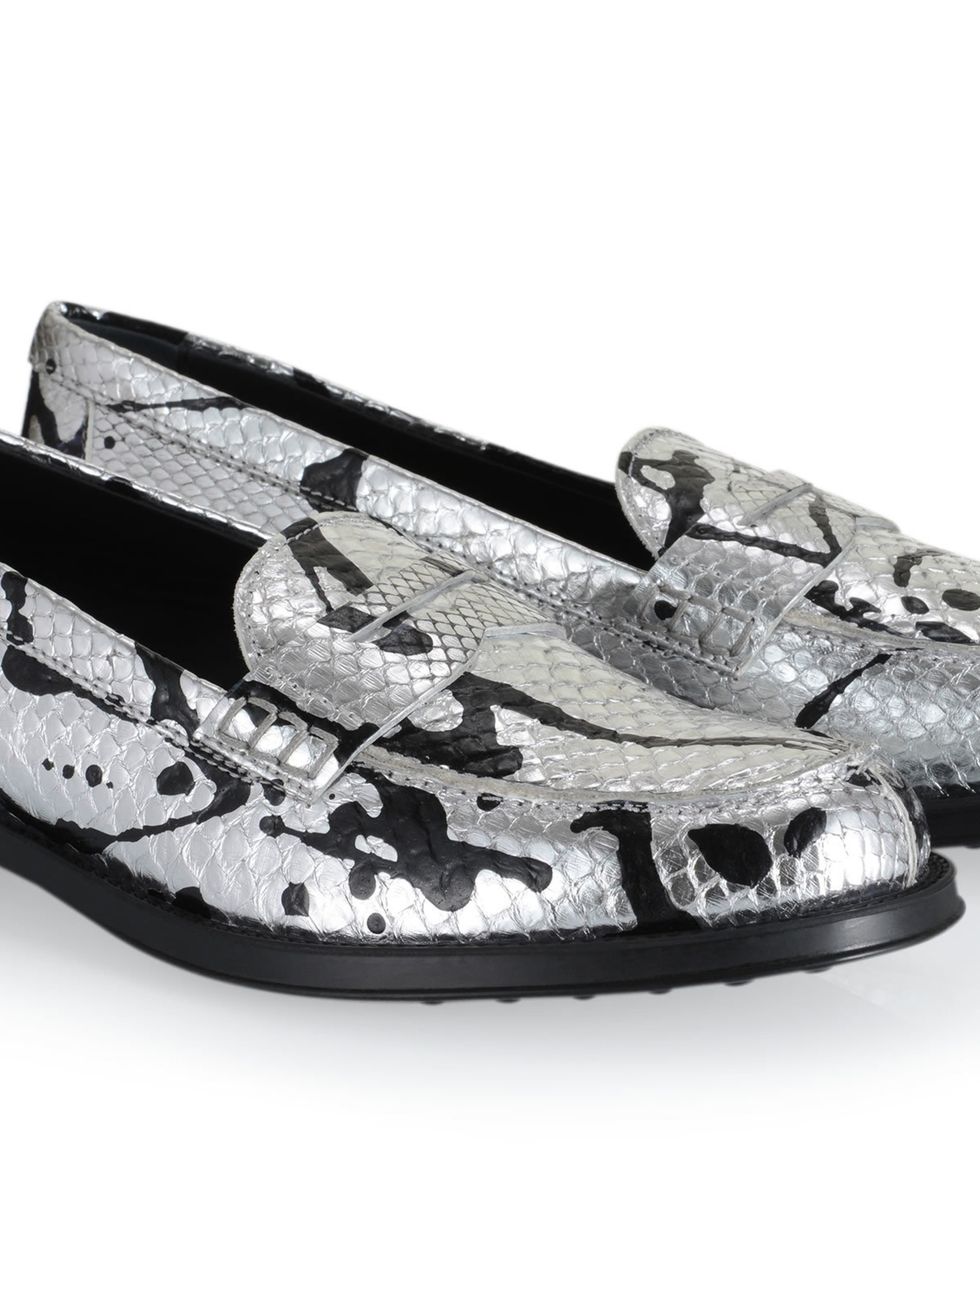 Product, Style, Black, Grey, Beige, Natural material, Ballet flat, Silver, Still life photography, Fashion design, 